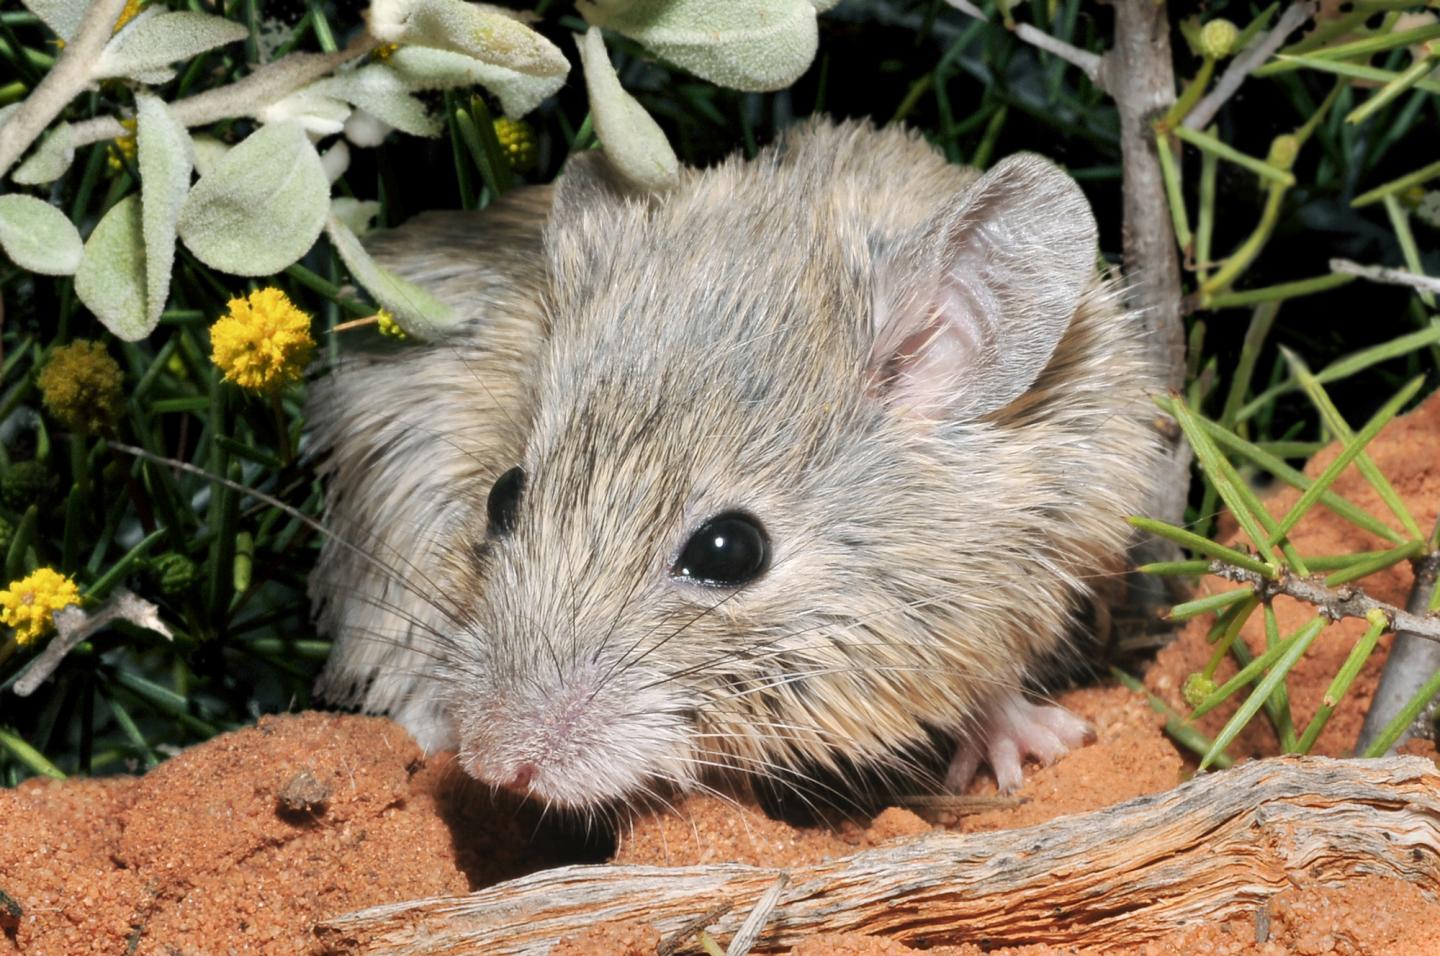 Close-up of a furry, grey and beige mouse with round ears standing on red dirt.